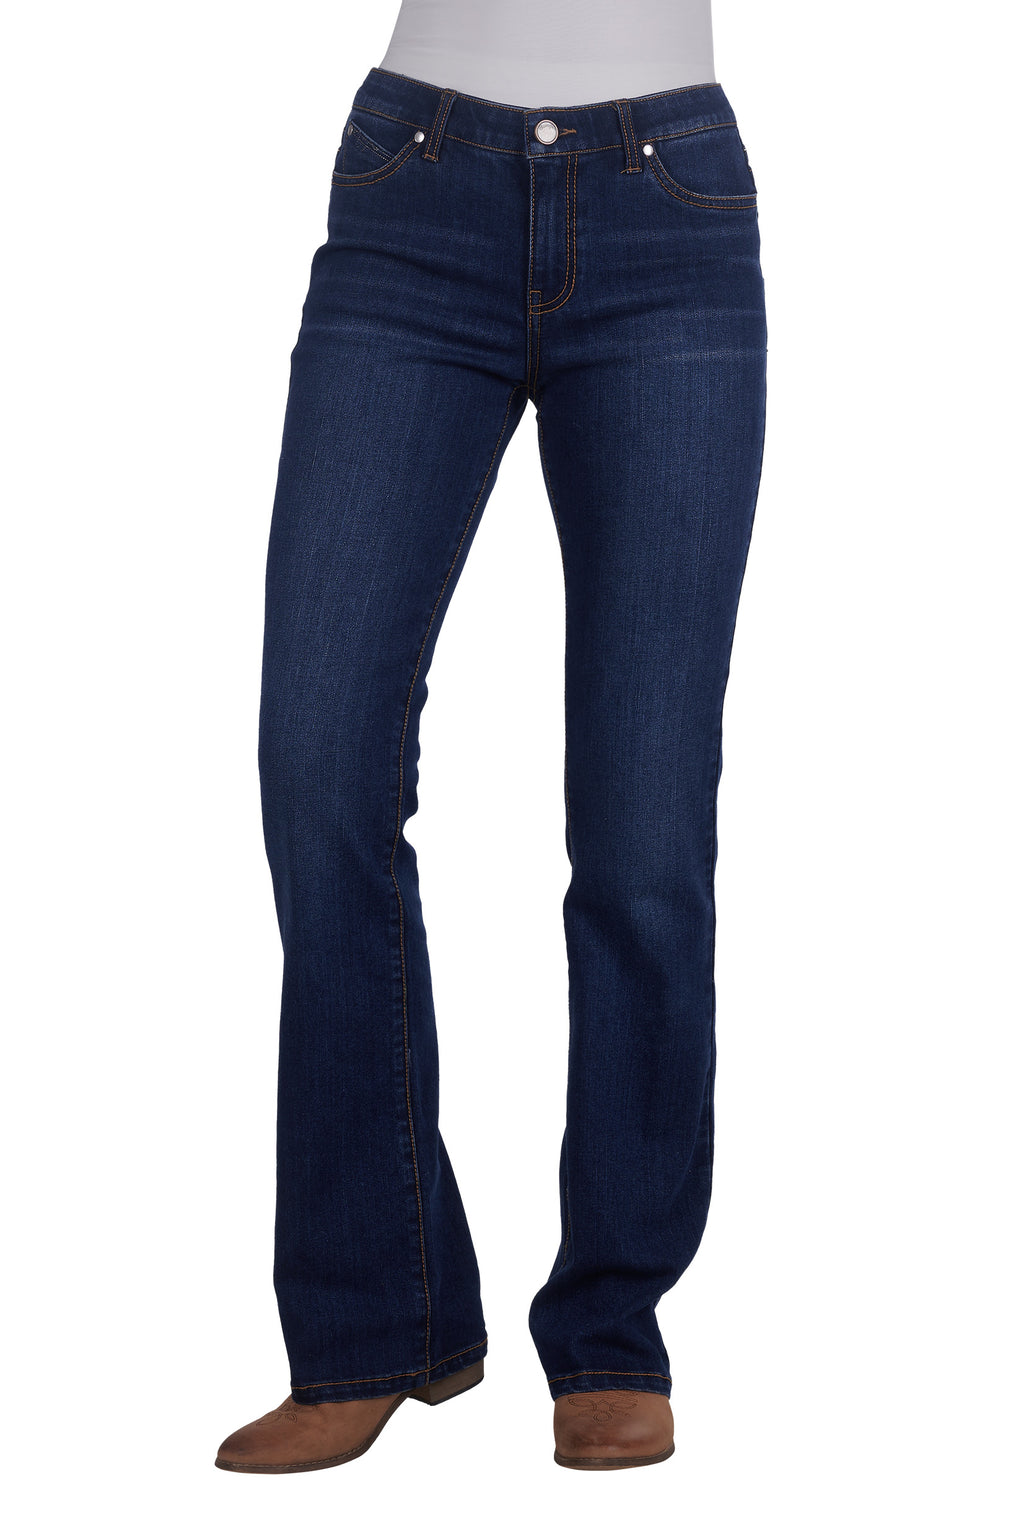 Women's Tilly Jean Q Baby Booty